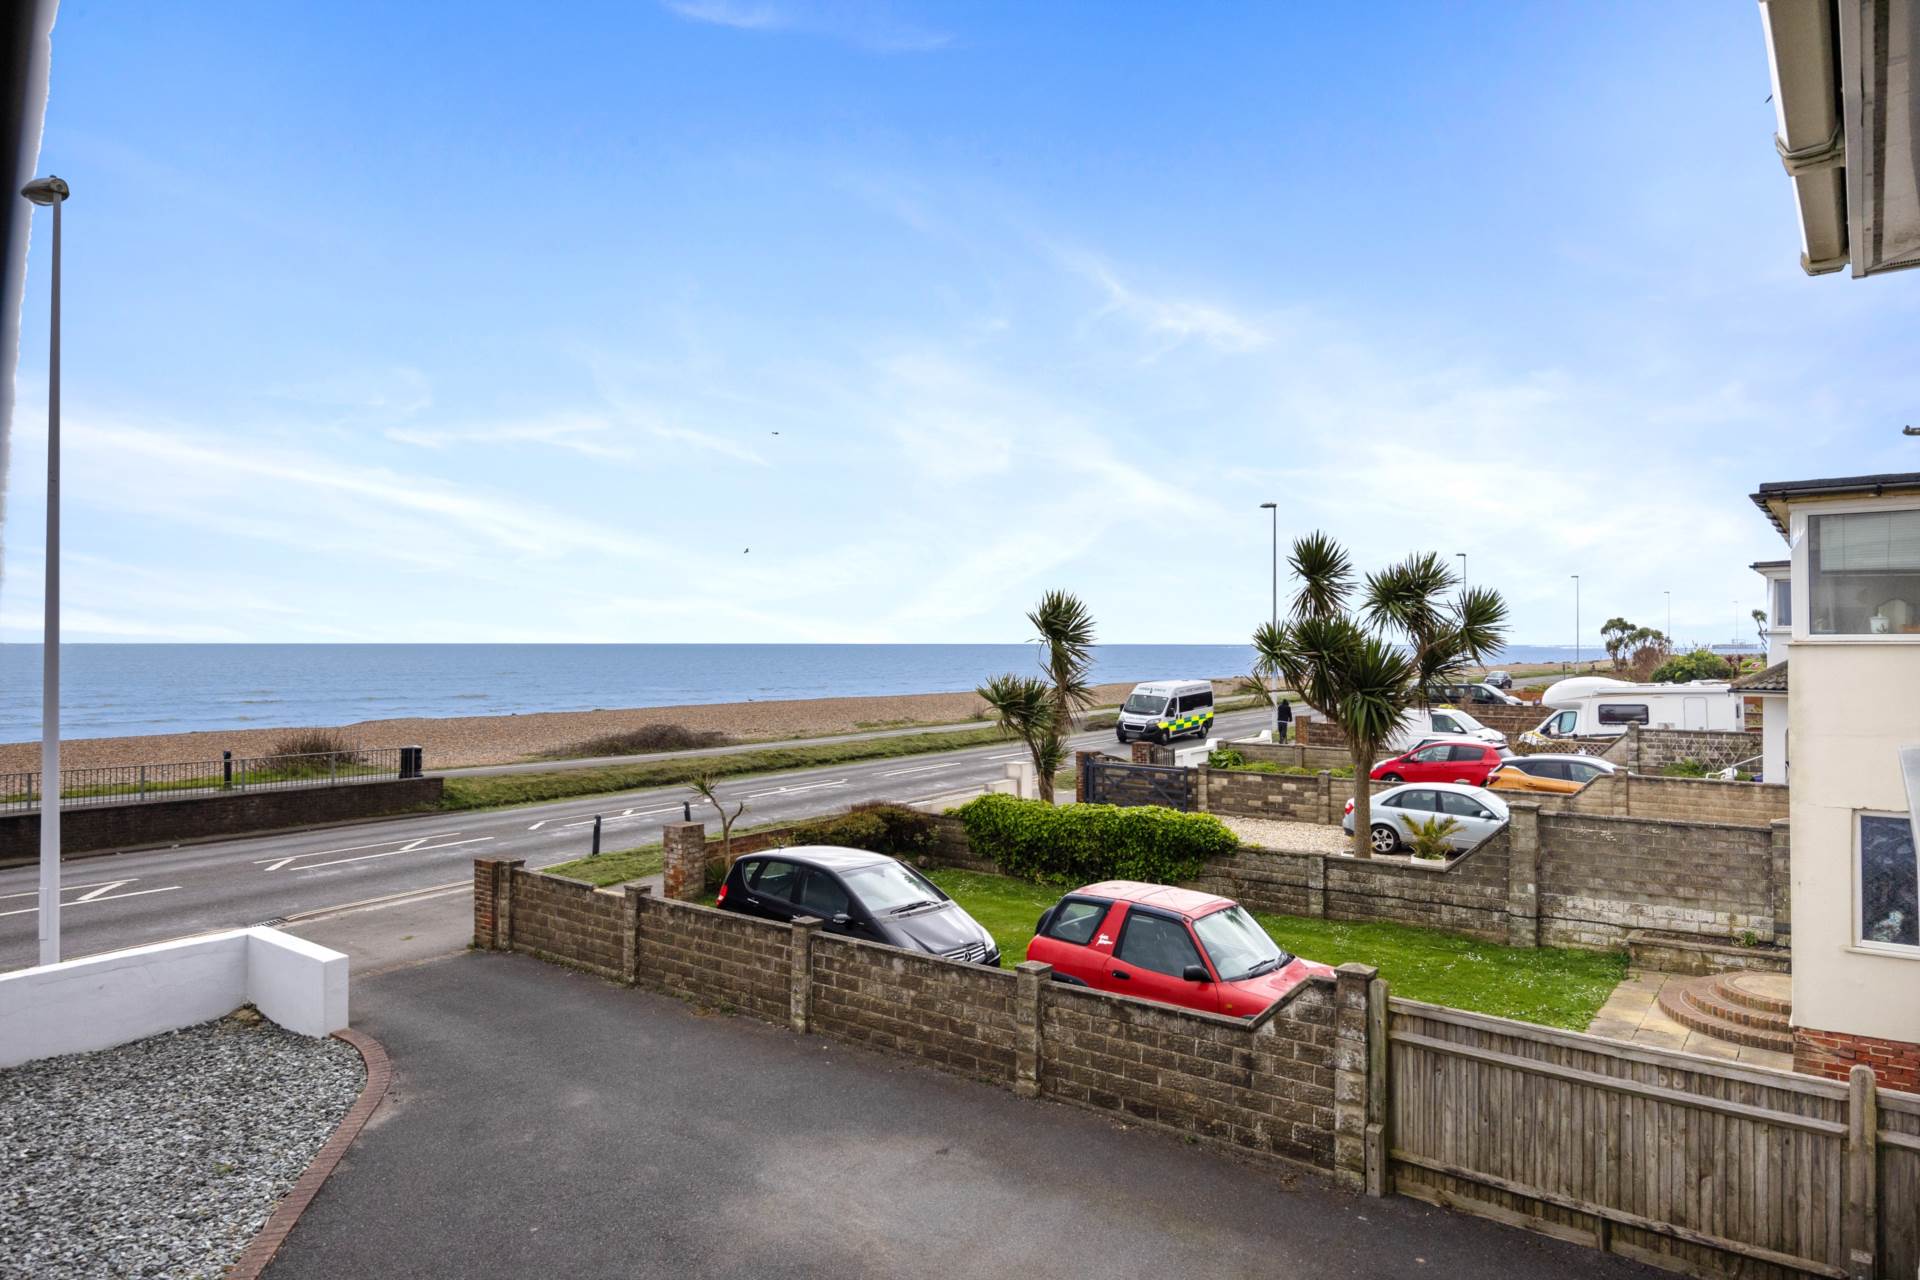 Sea Front View, Worthing Seafront, Image 1